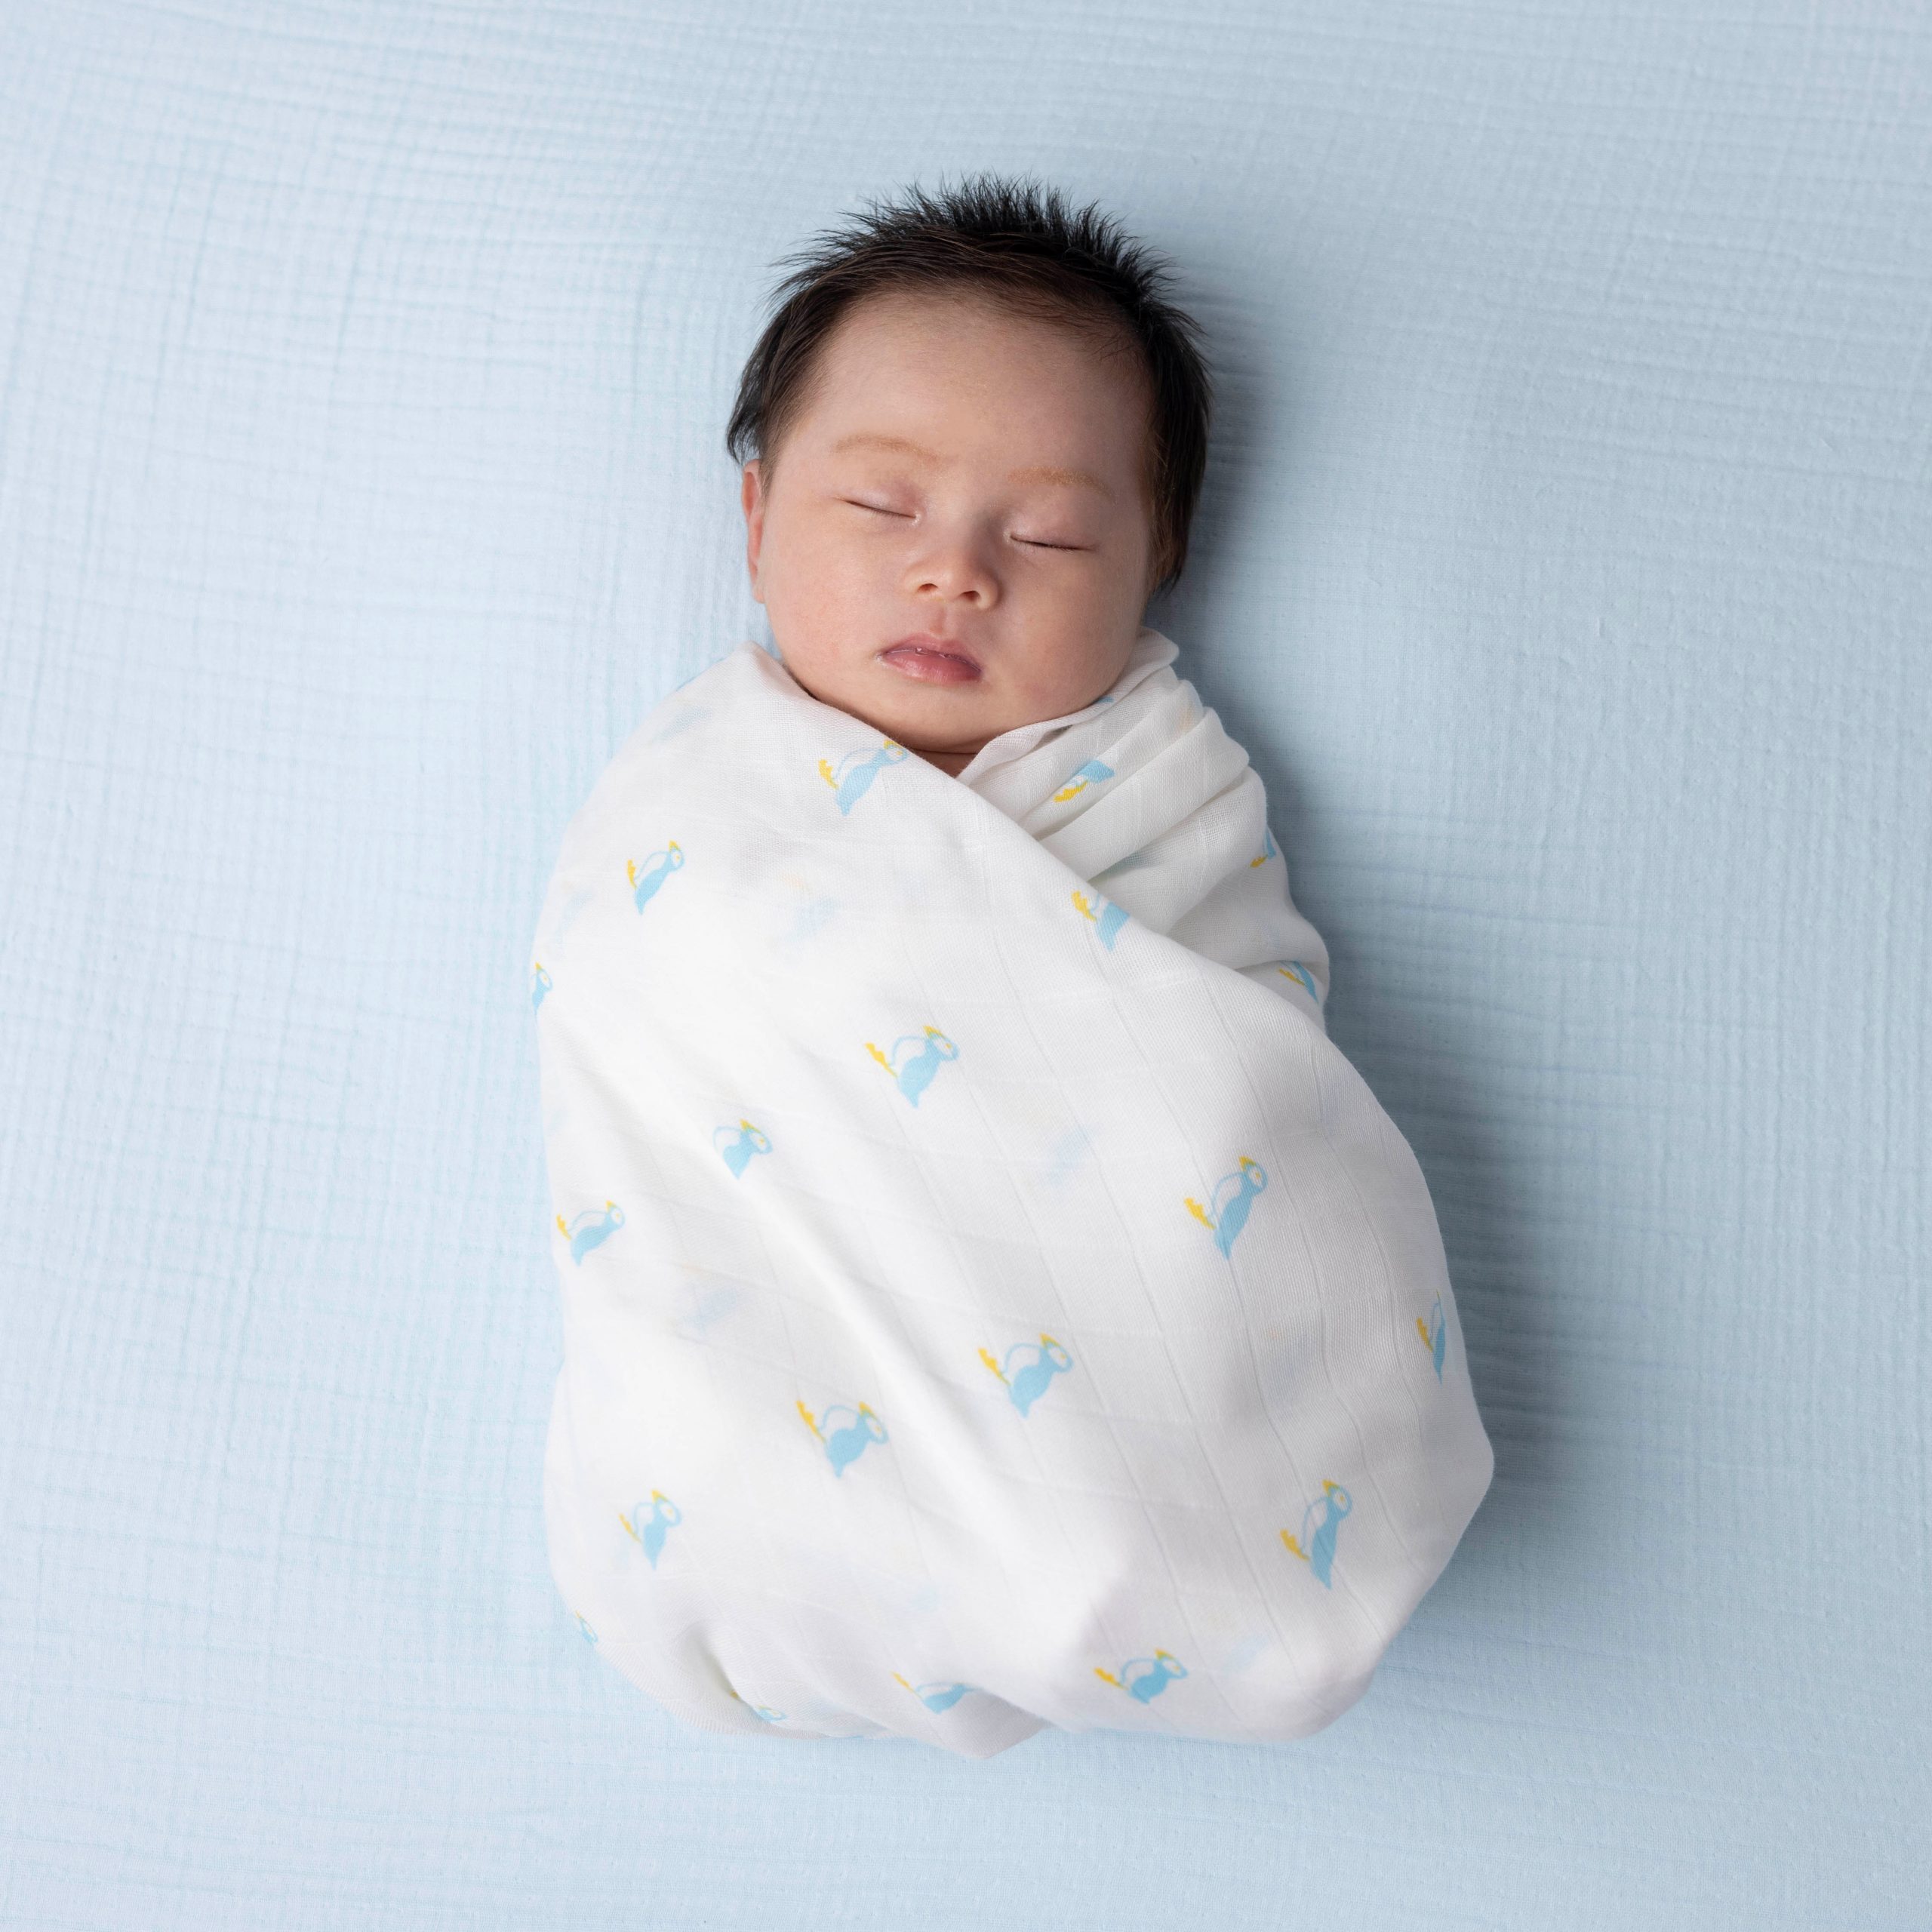 How to swaddle my baby in puffin print muslin